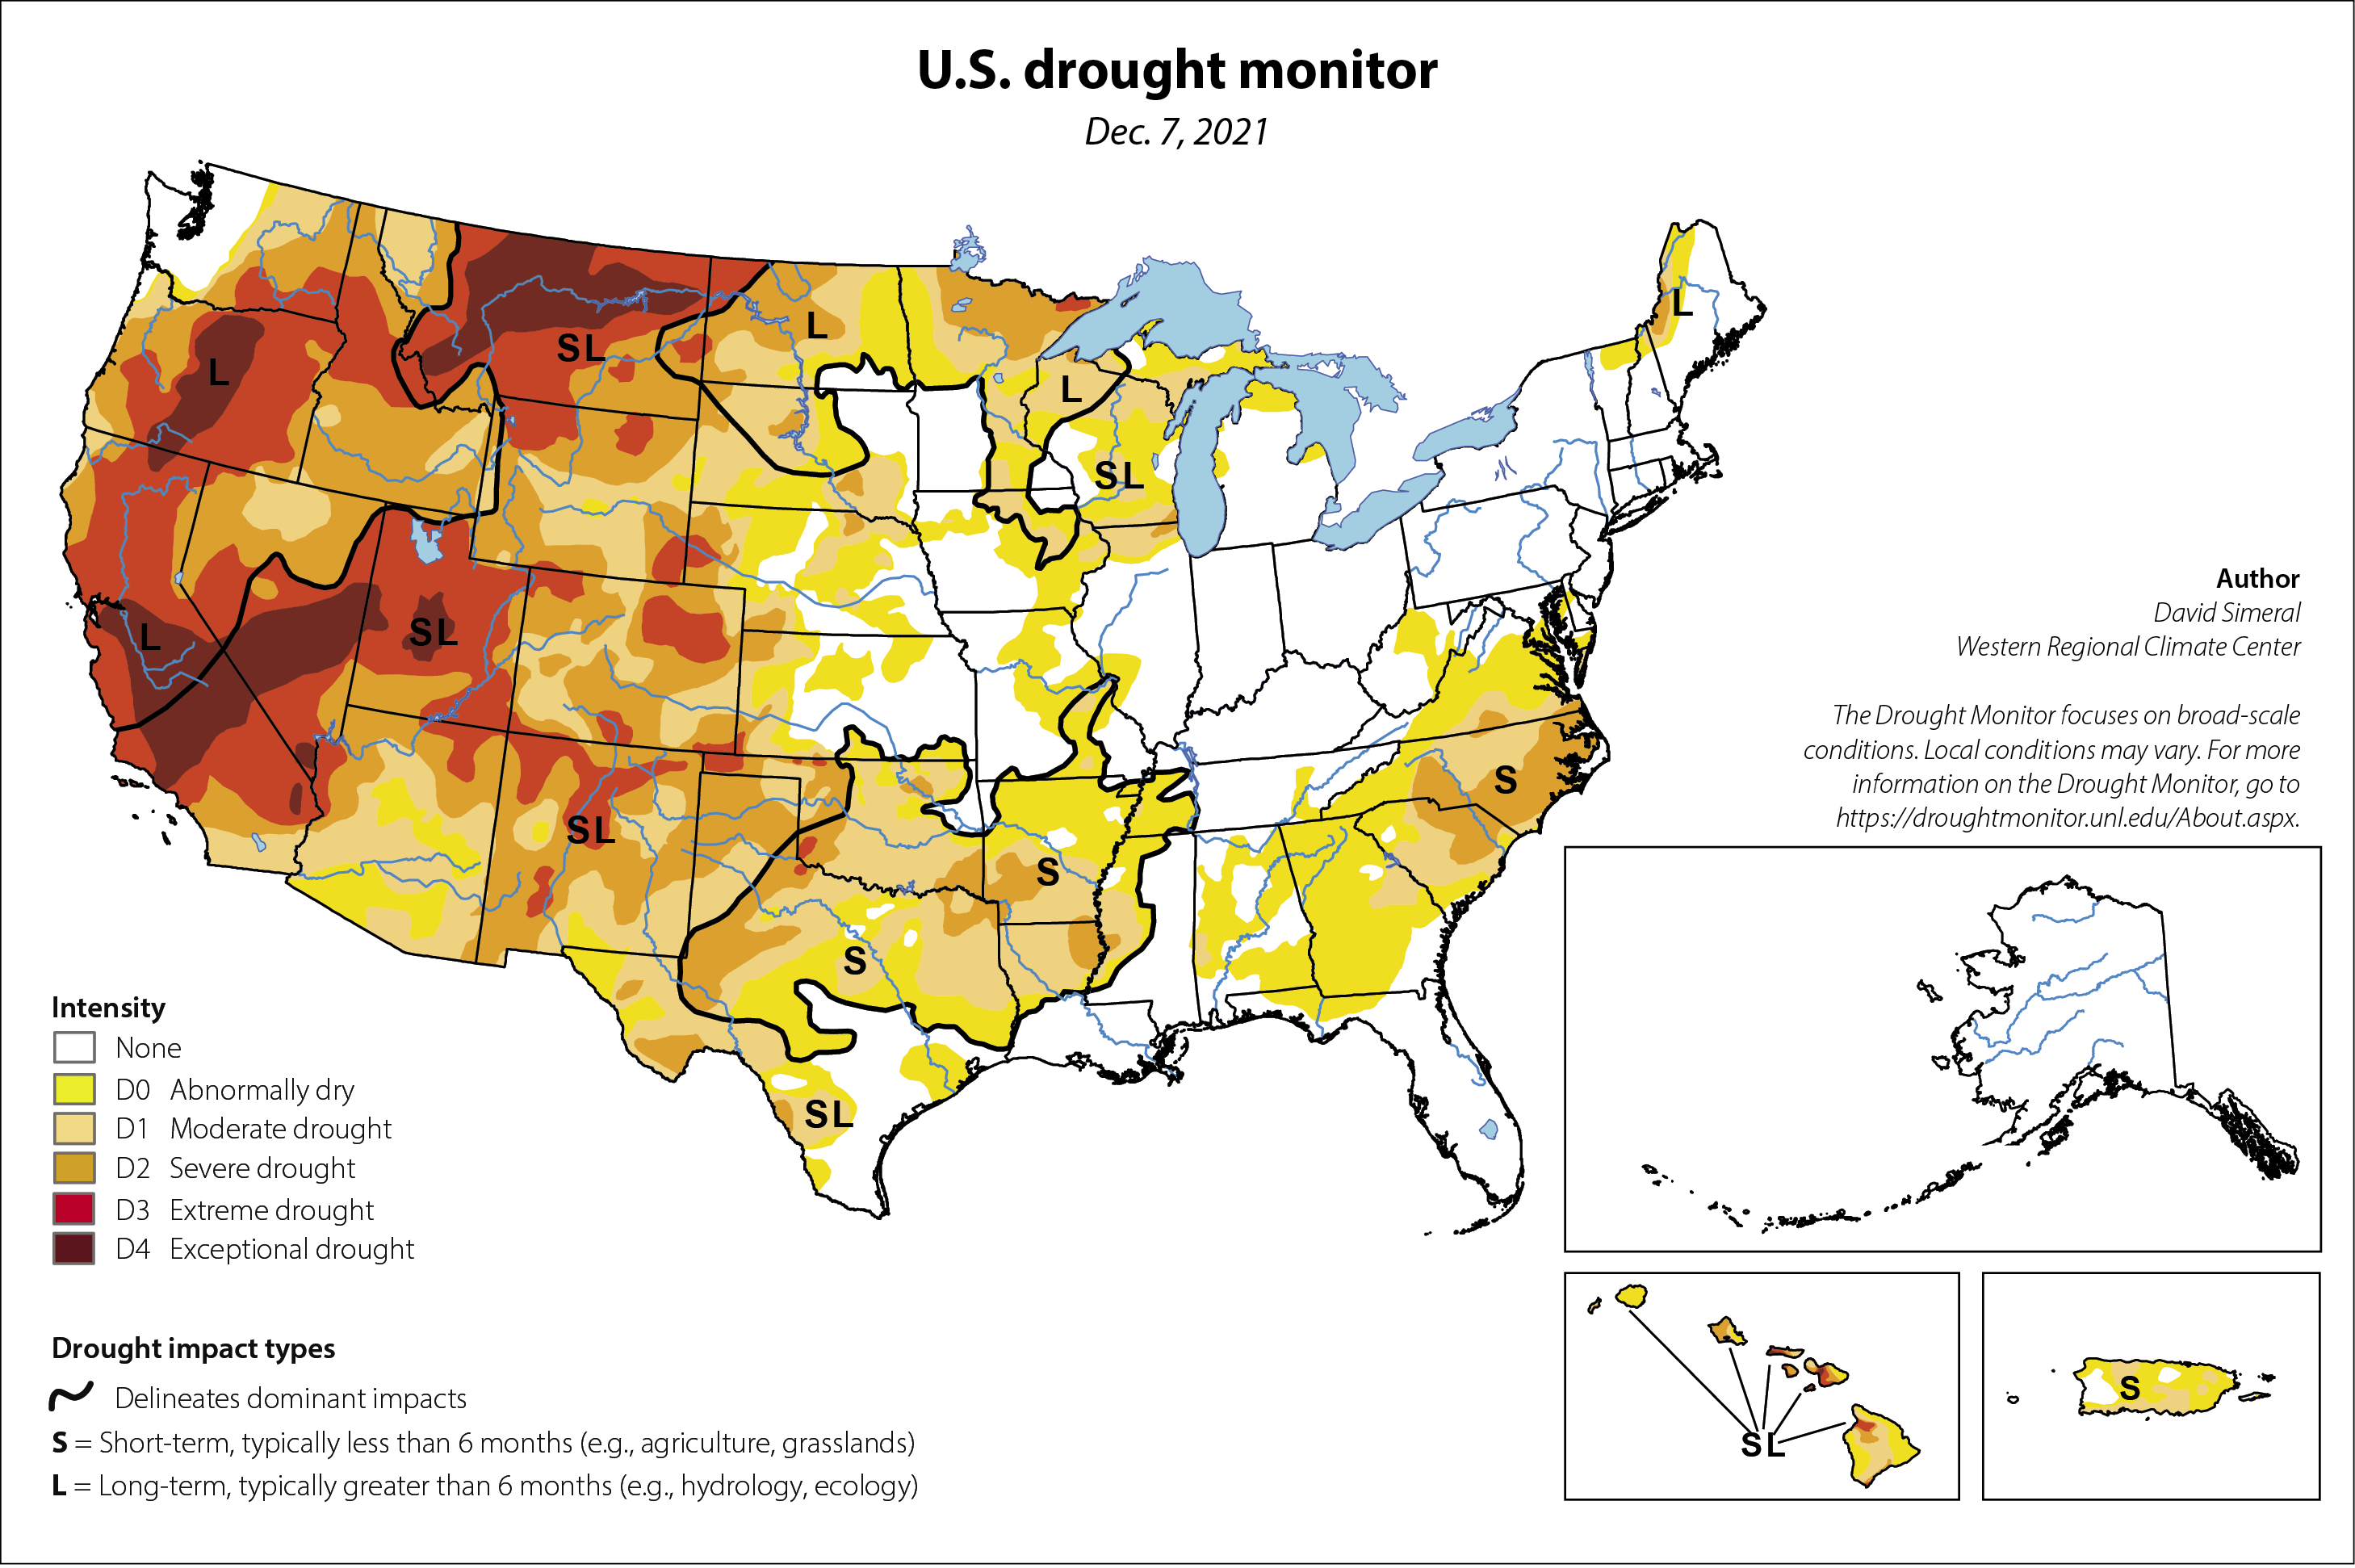 La Niña has returned, leading to concerns that drought will persist or further intensify across the nation’s southwestern quadrant.